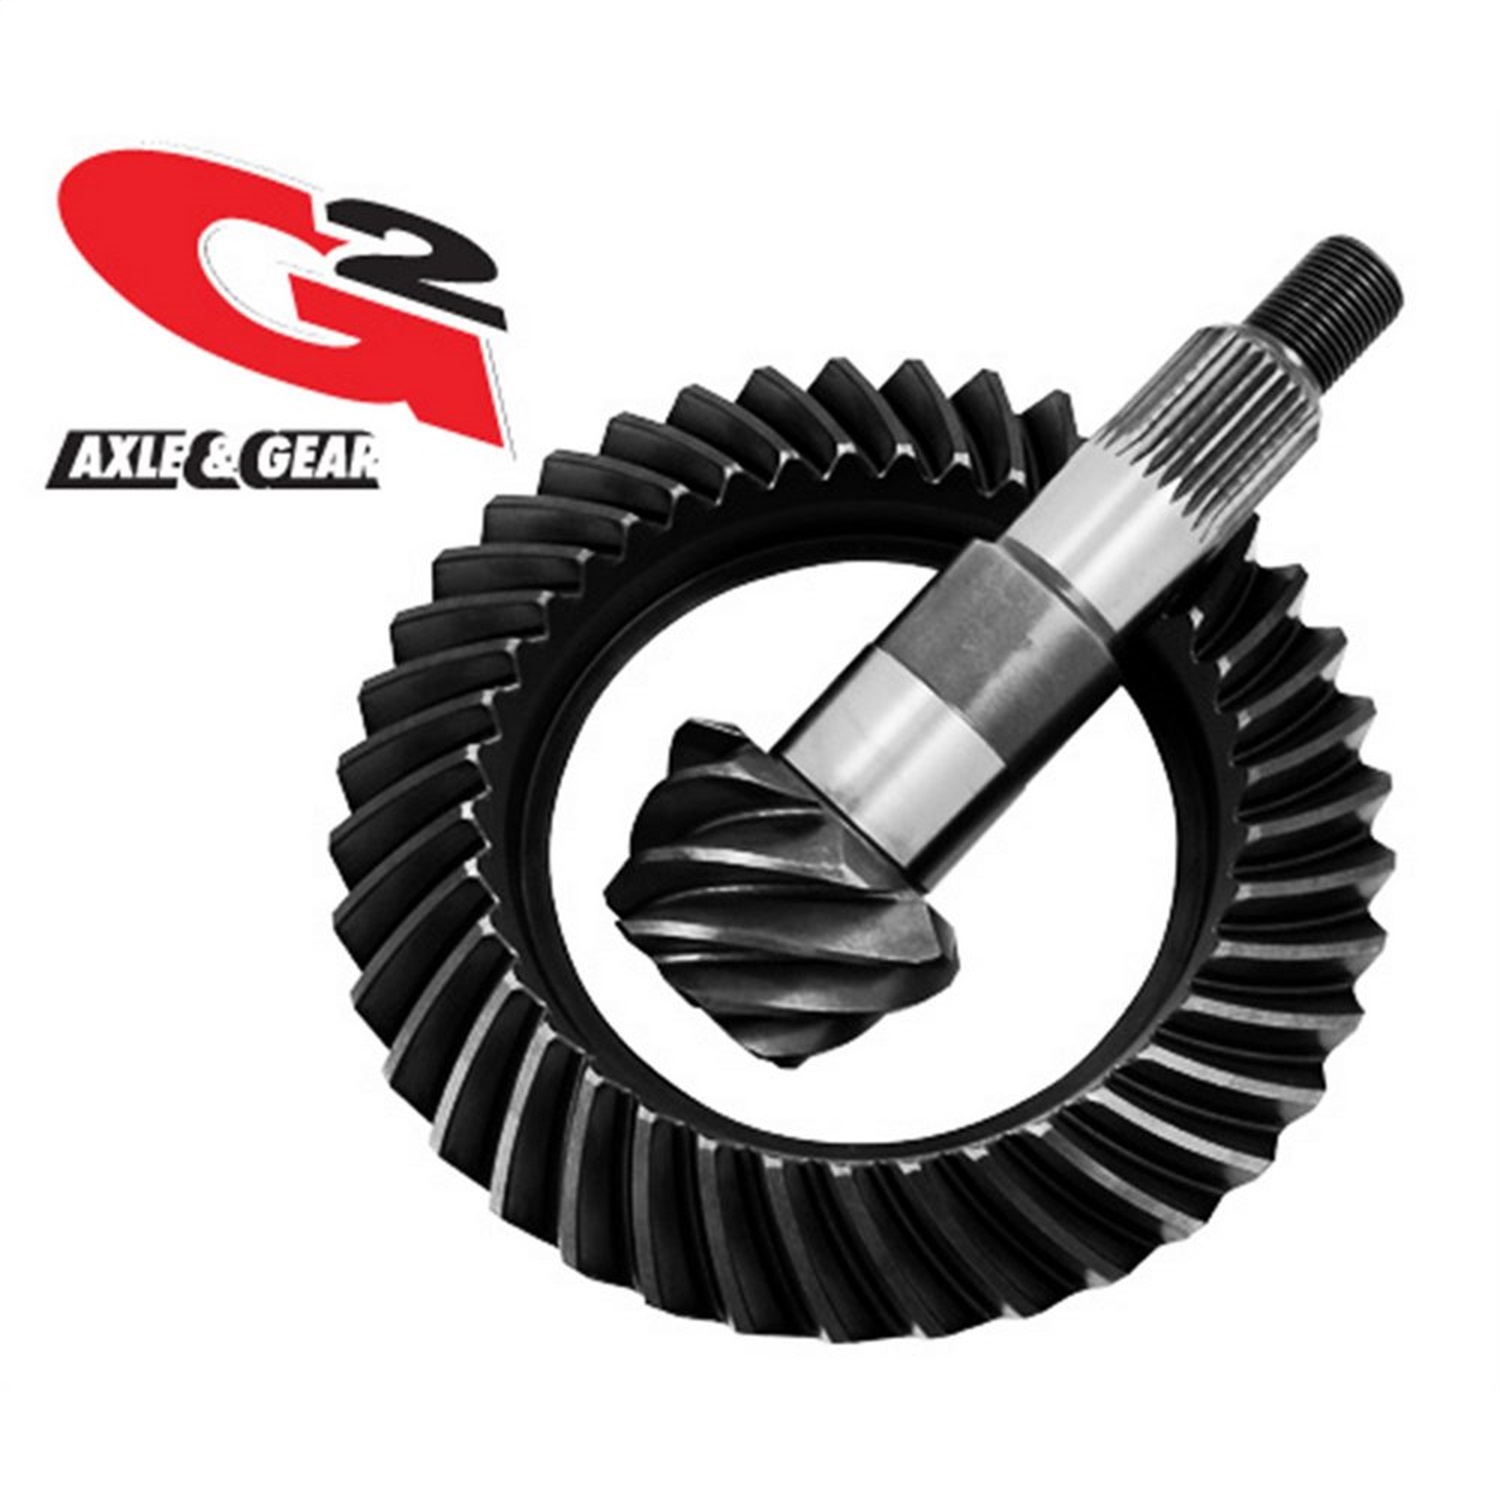 G2 Axle and Gear G2 Axle and Gear 2-2029-488 Ring and Pinion